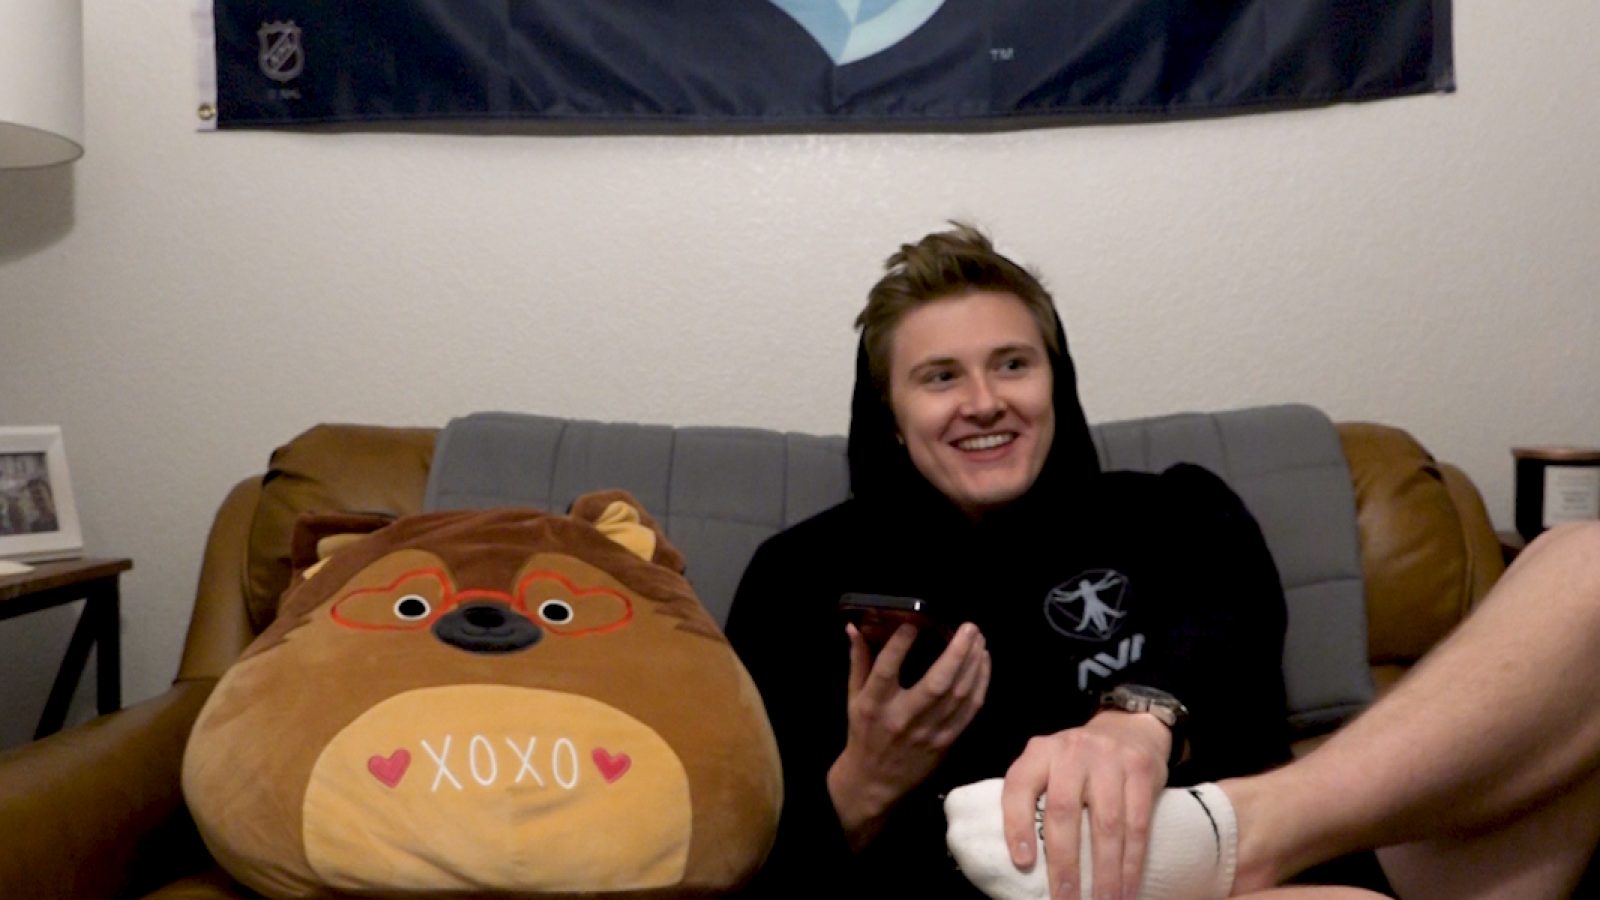 Austin Calls an Old Friend: A smiling Austin sits on his couch with his stuffed animal friend. He is calling his friend, Erin.